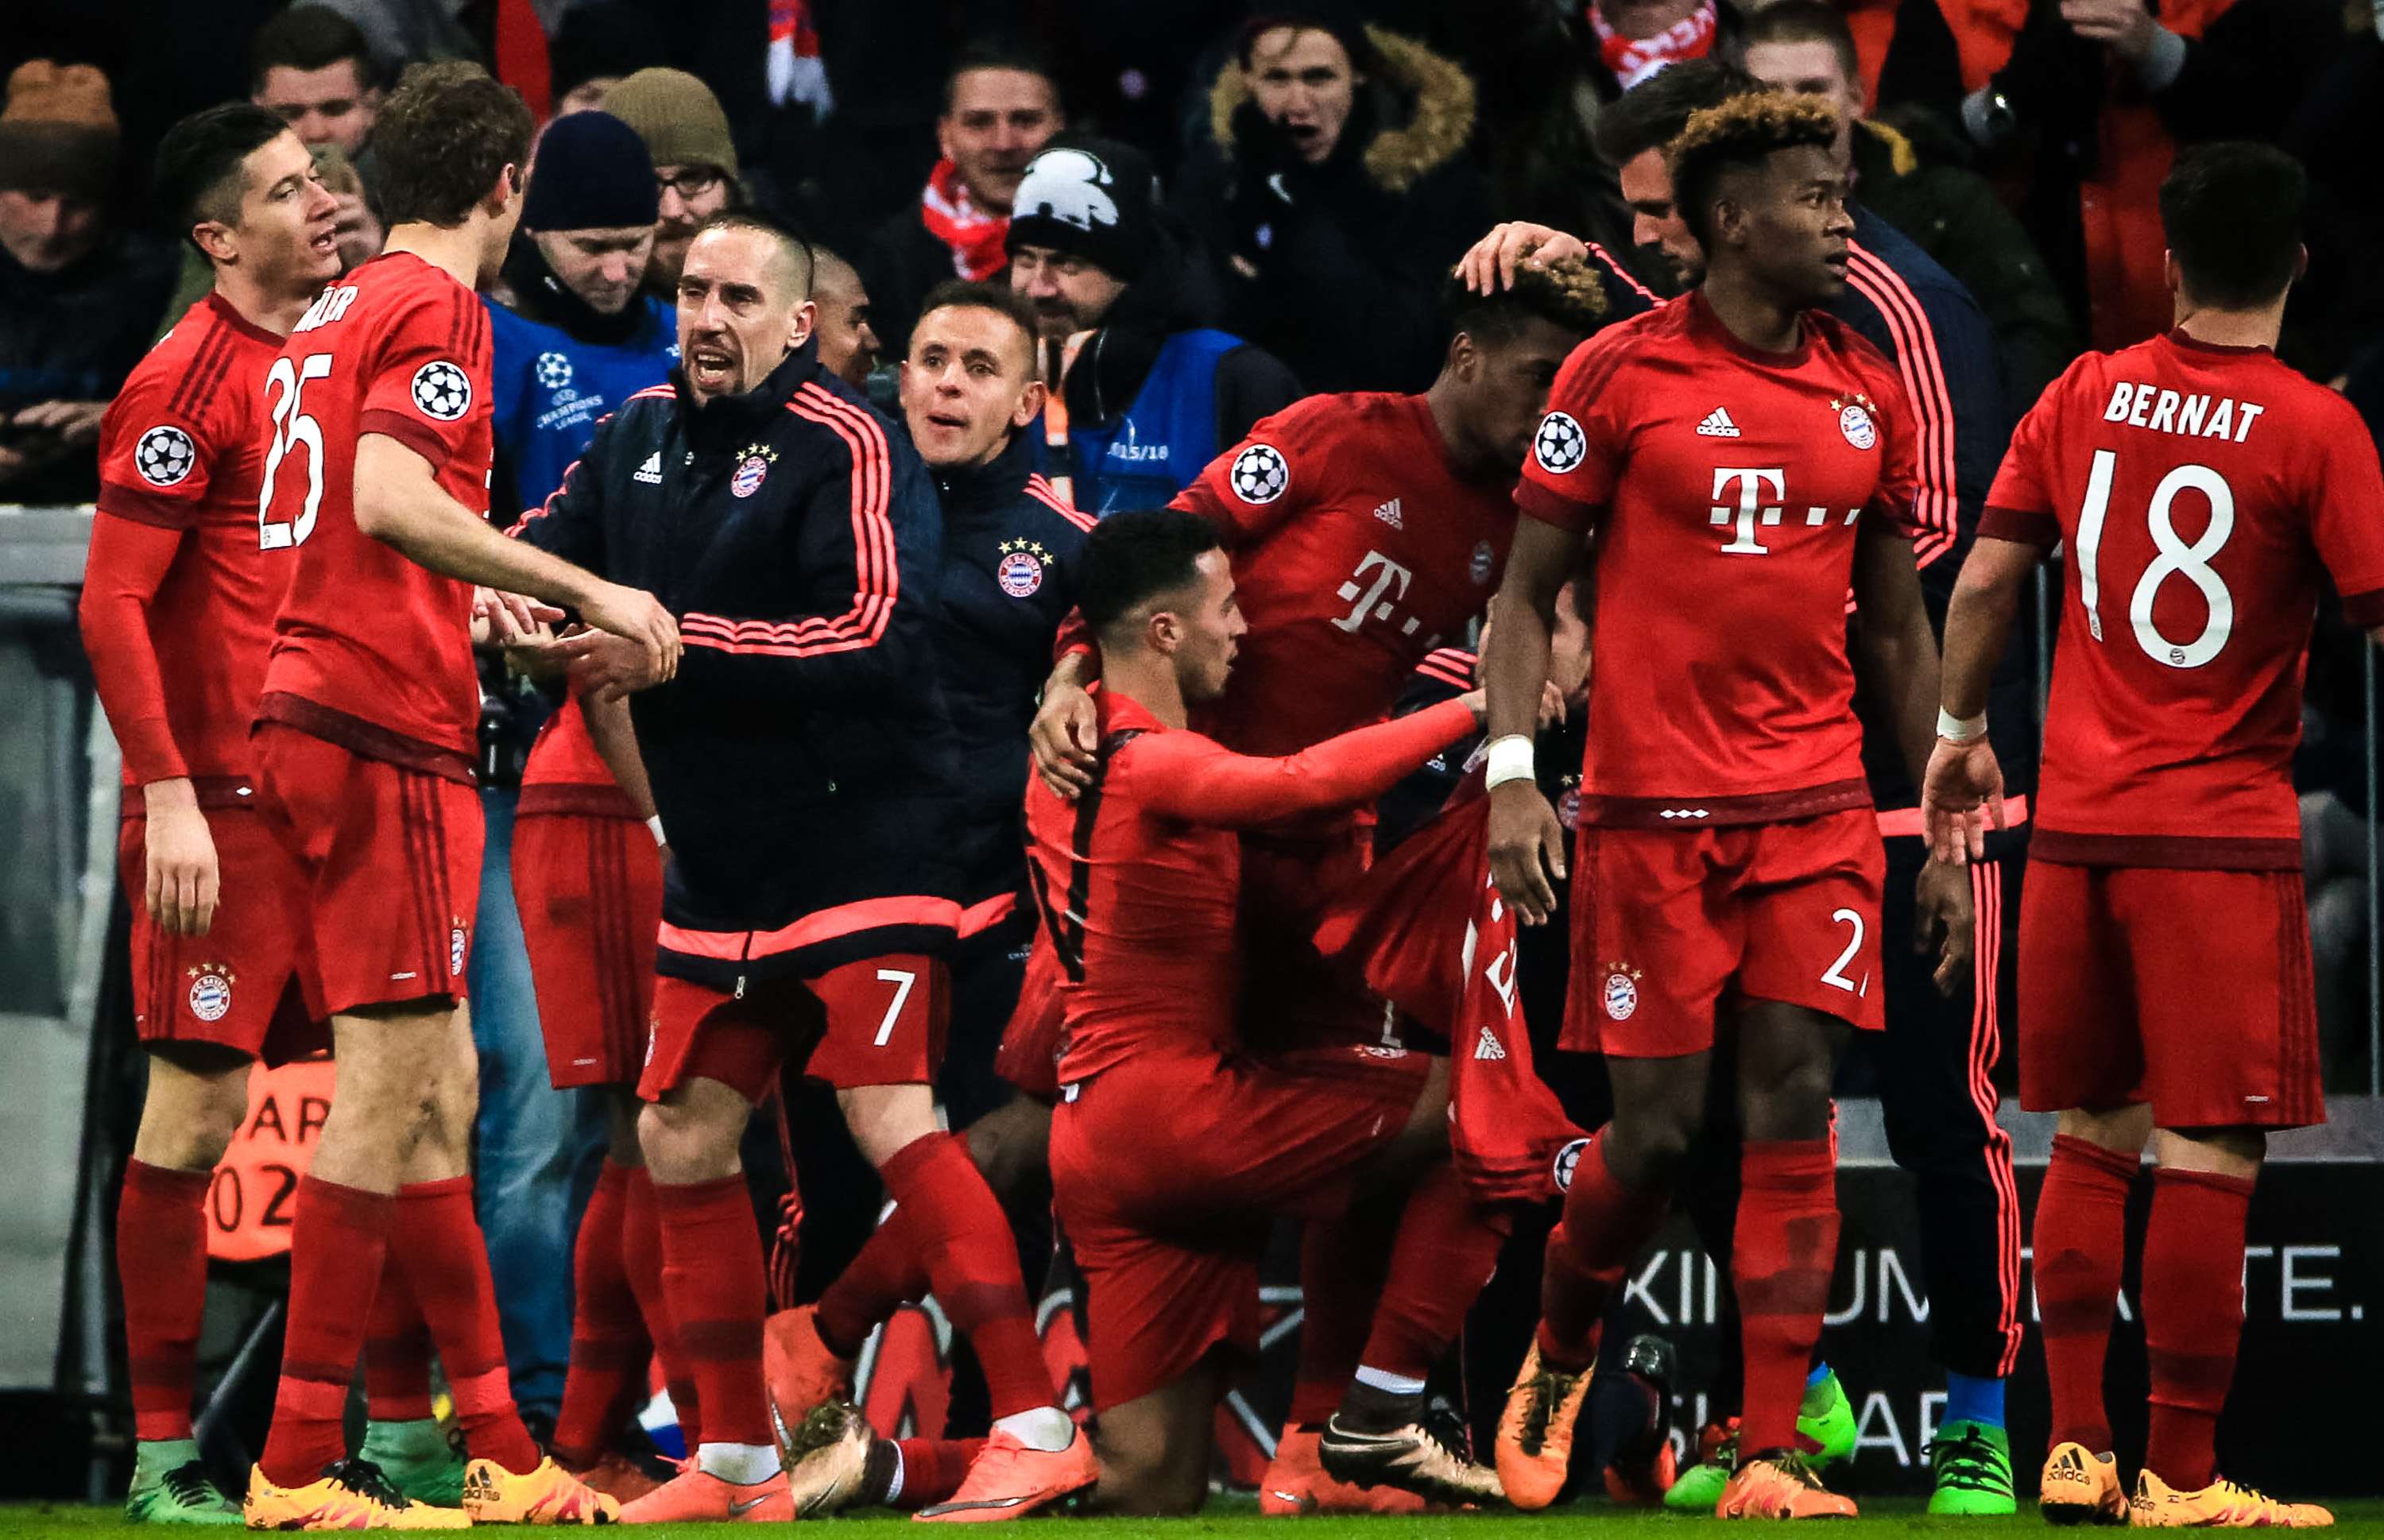 Bayern Munich players are jubilant after a late comeback sealed their progress in the Uefa Champions League. Photo: Xinhua